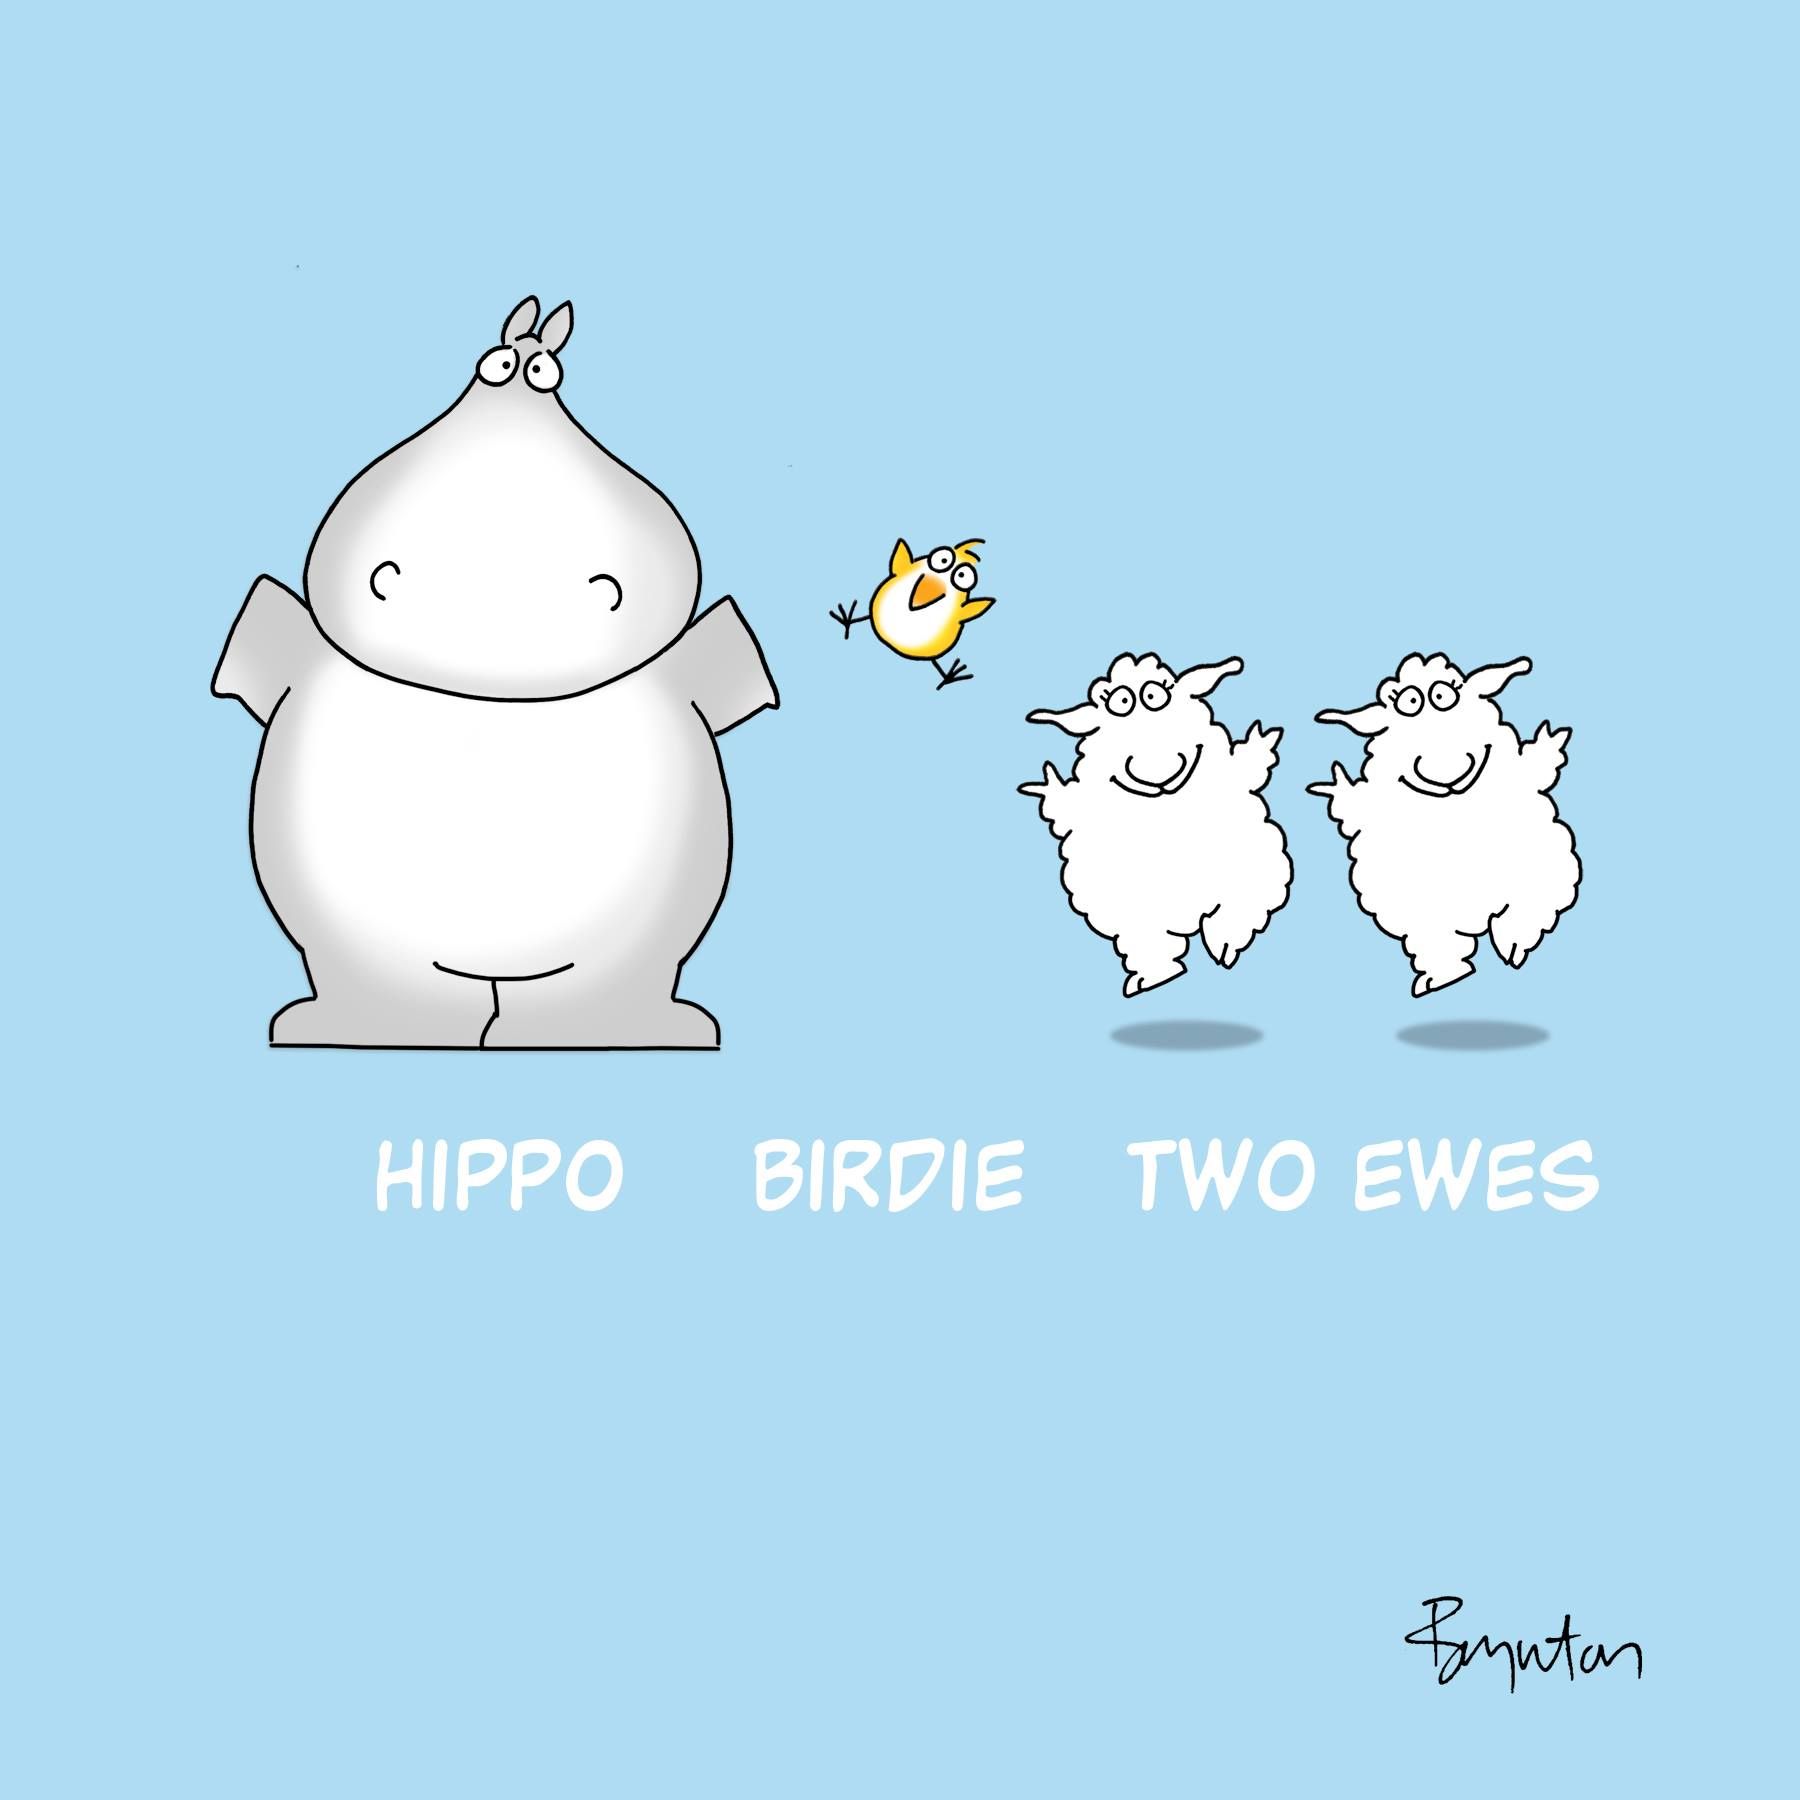 Hippobirdie two ewes